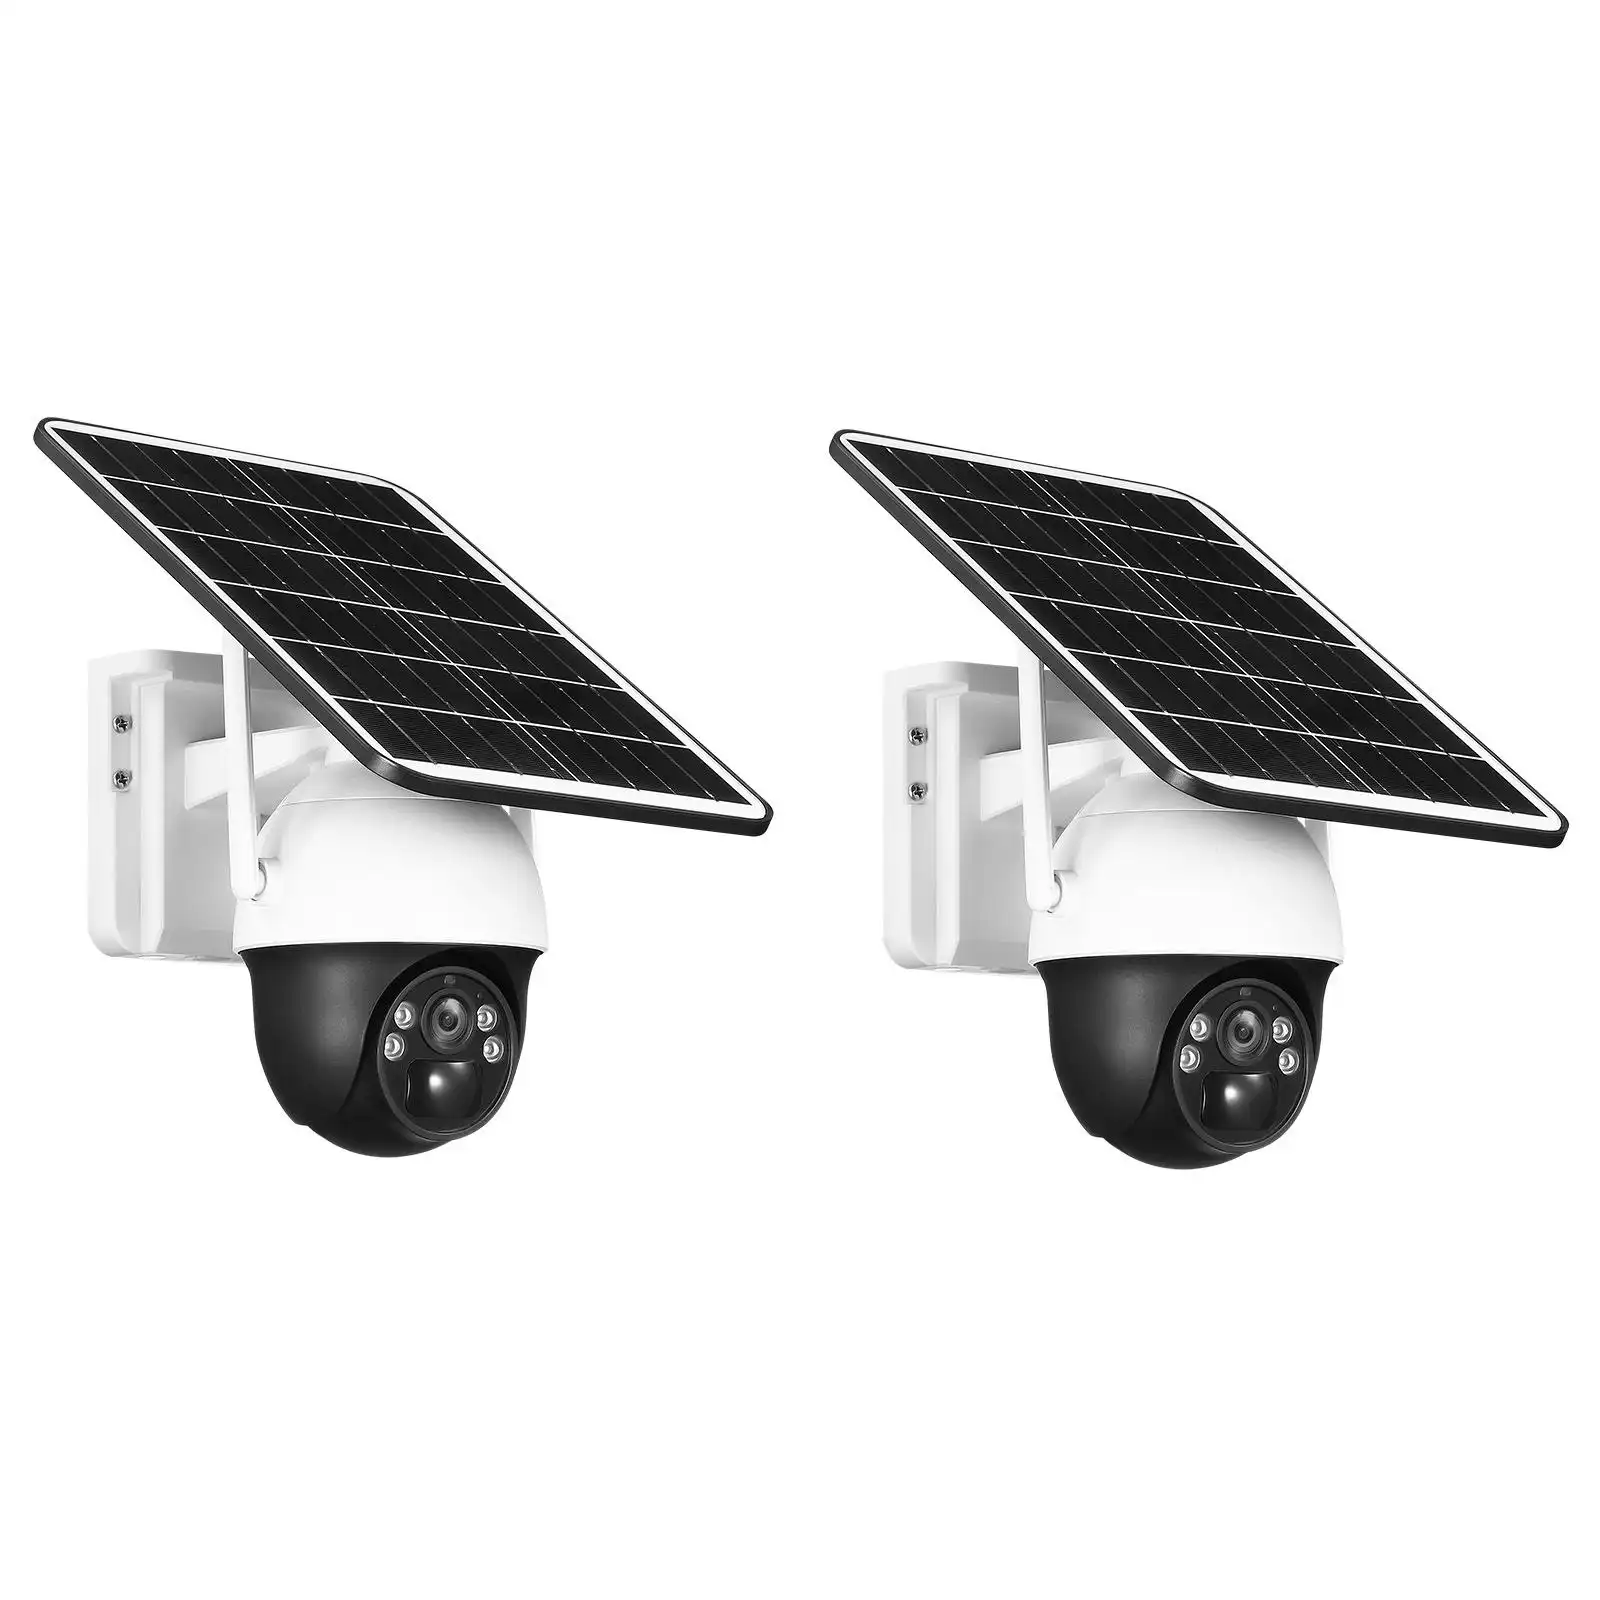 Ausway 4G Solar Security Camera Wireless Outdoor CCTV Home Surveillance System with Battery Remote Control x2